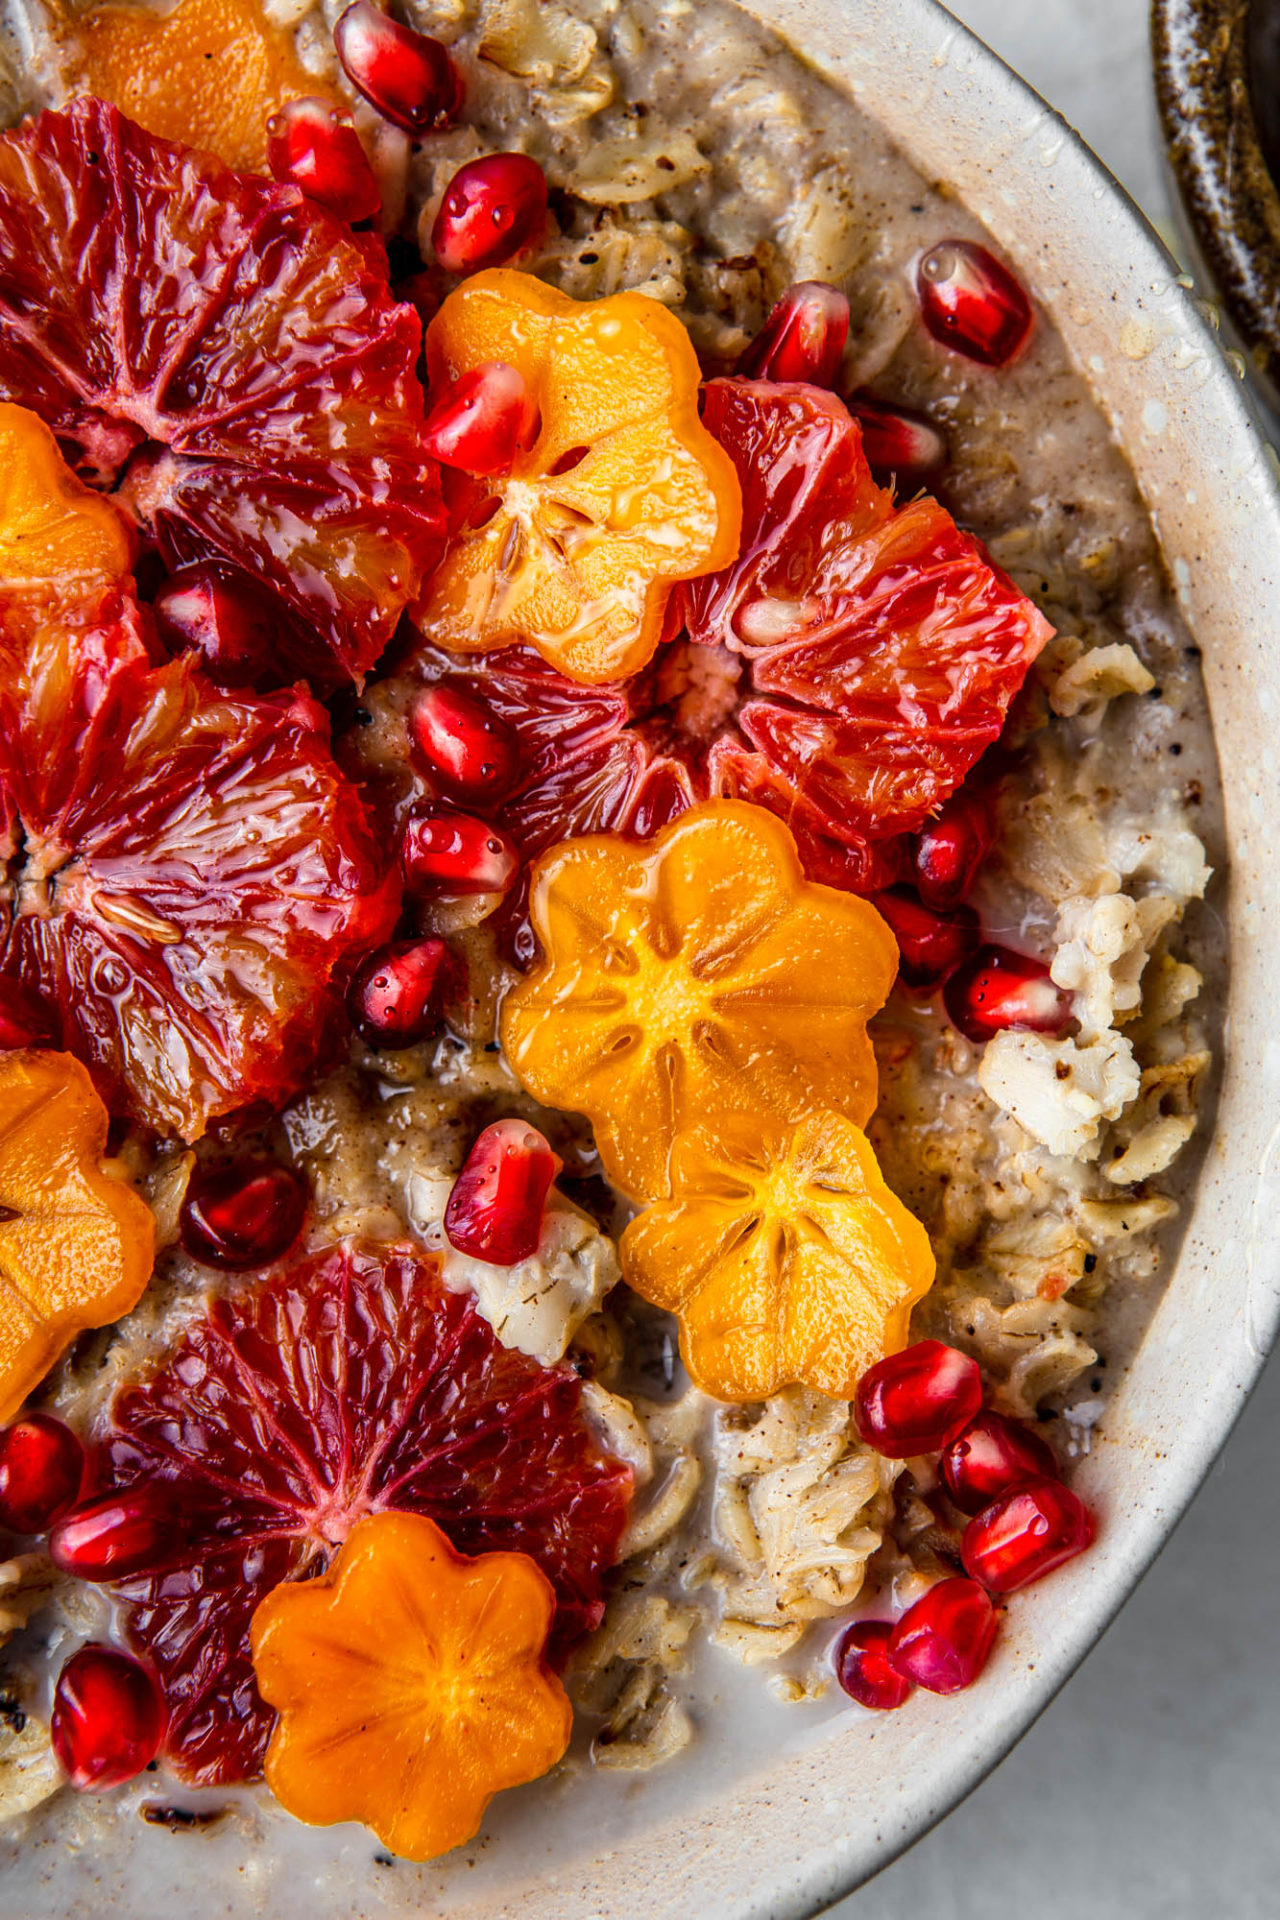 blood orange and permission oatmeal photography